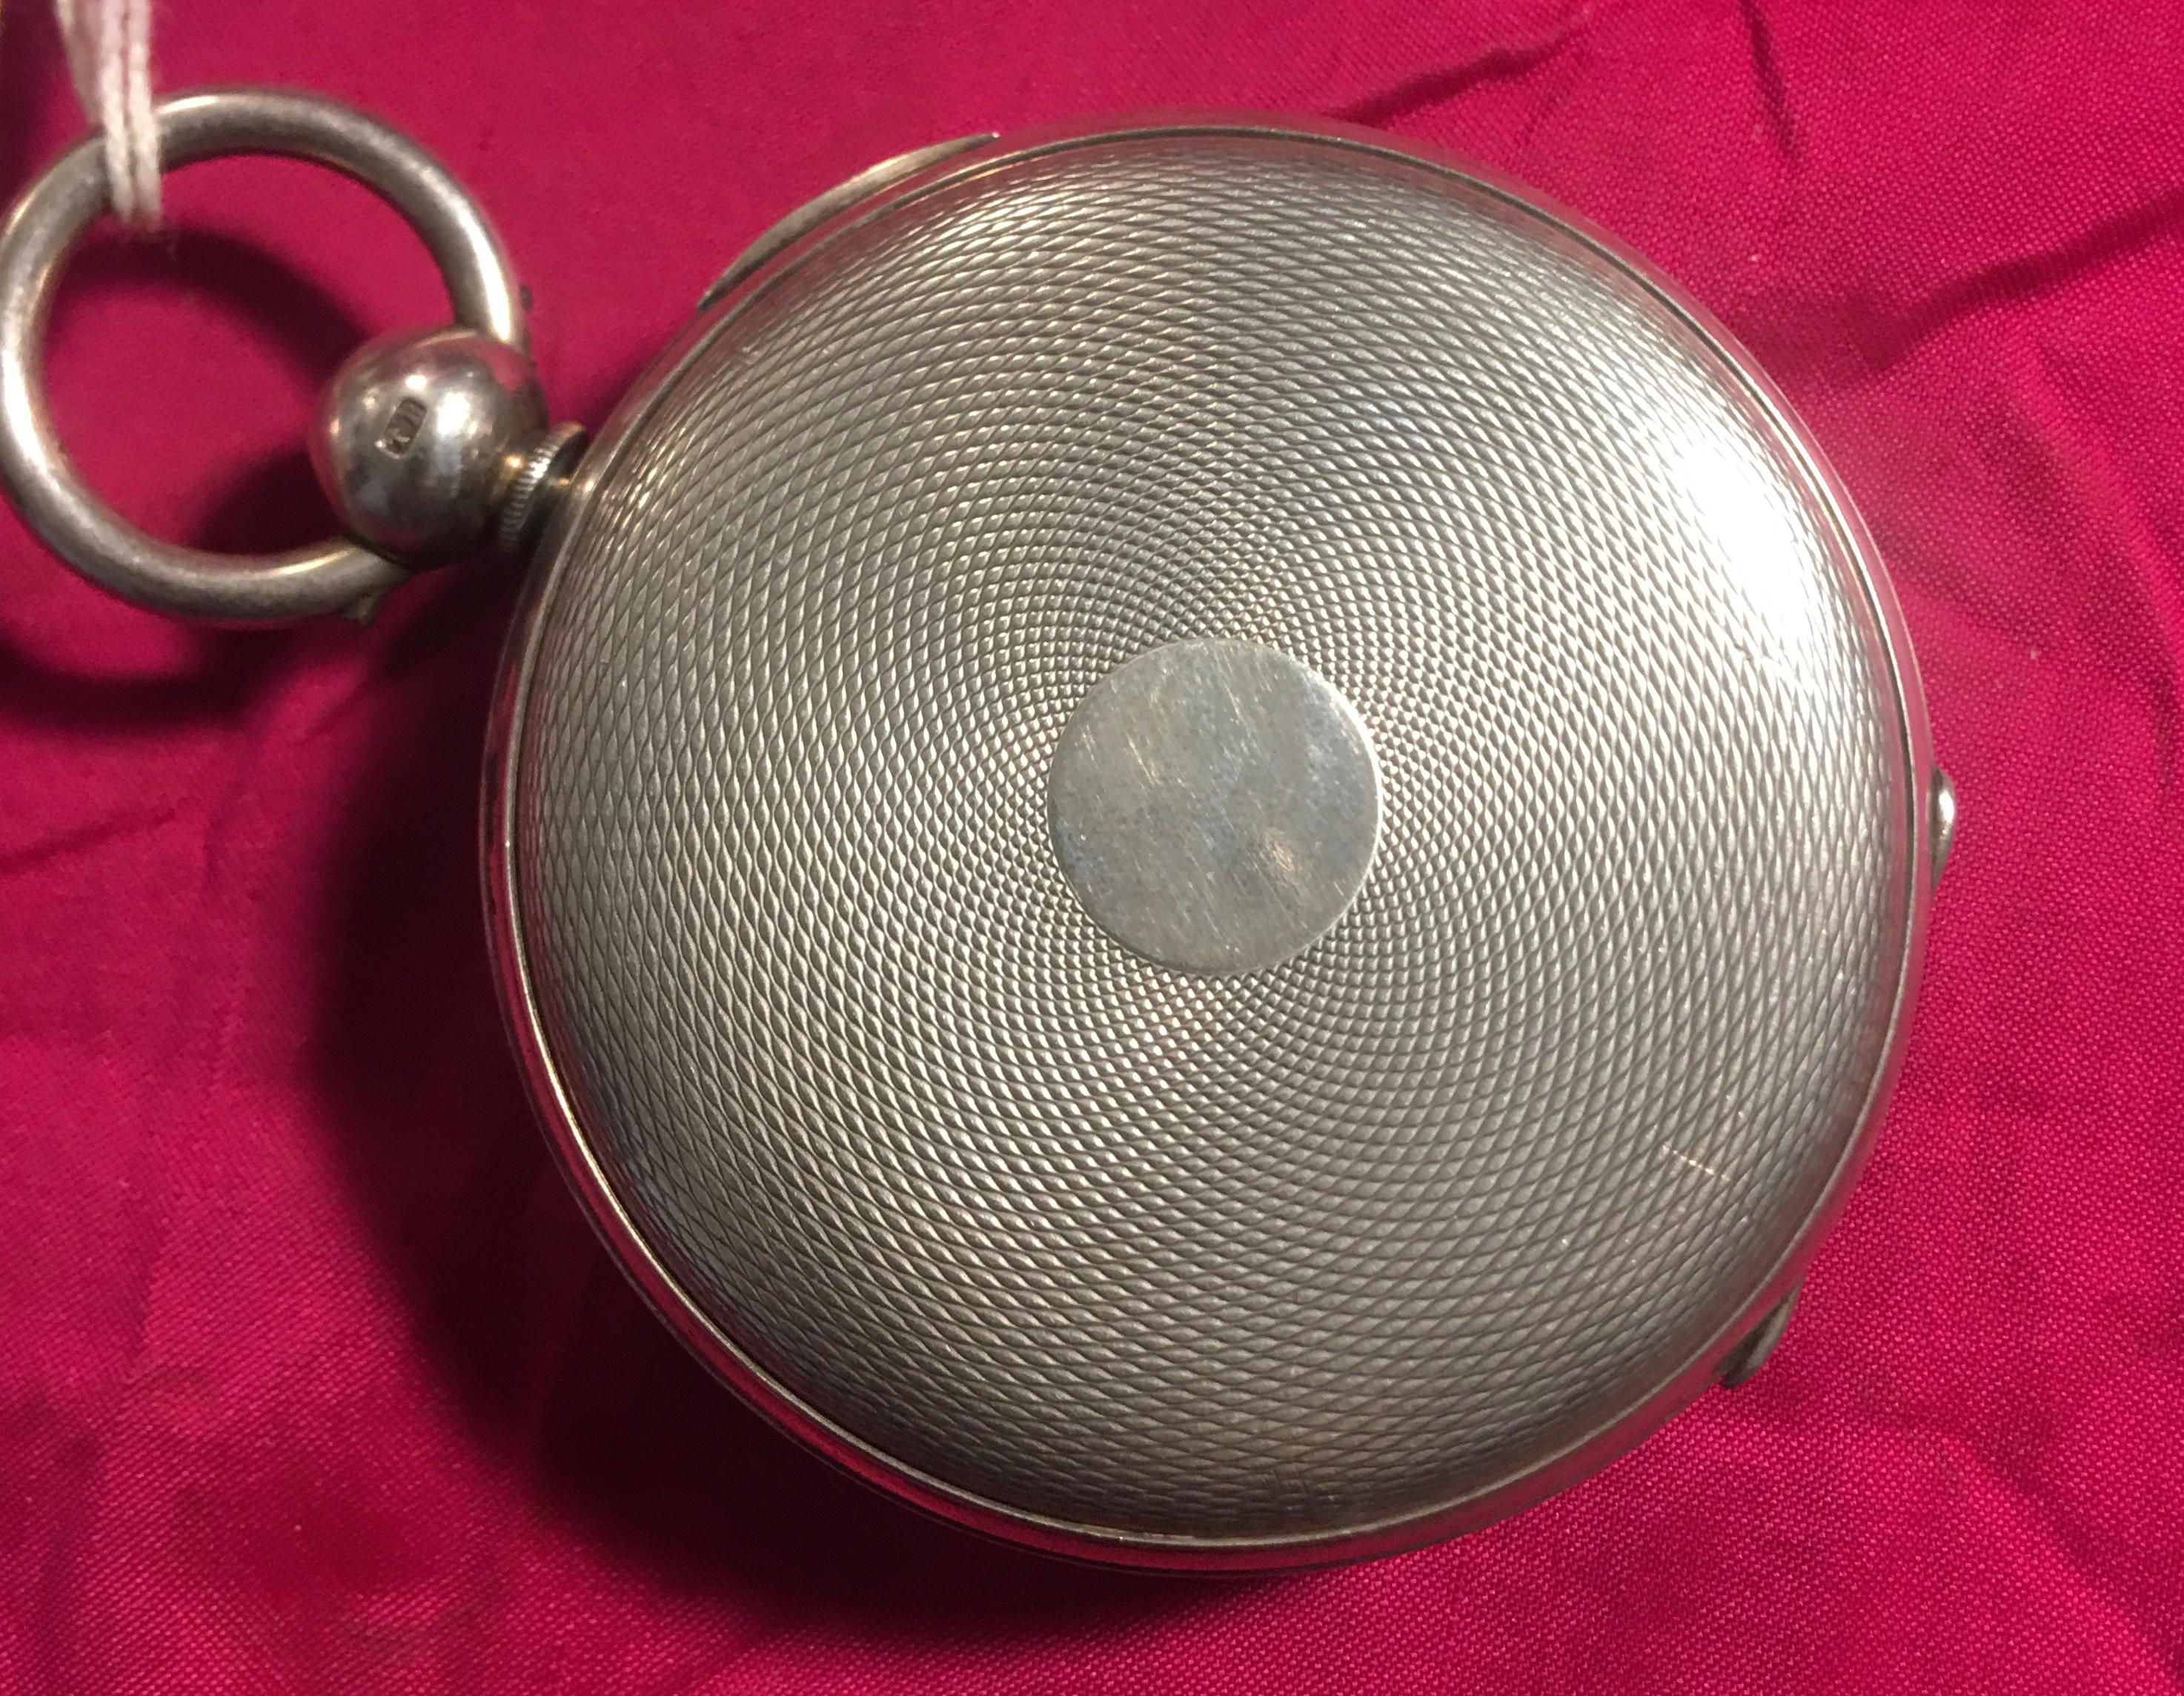 Beautiful Swiss Silver Musical Pocket Watch In Good Condition For Sale In Carlisle, GB